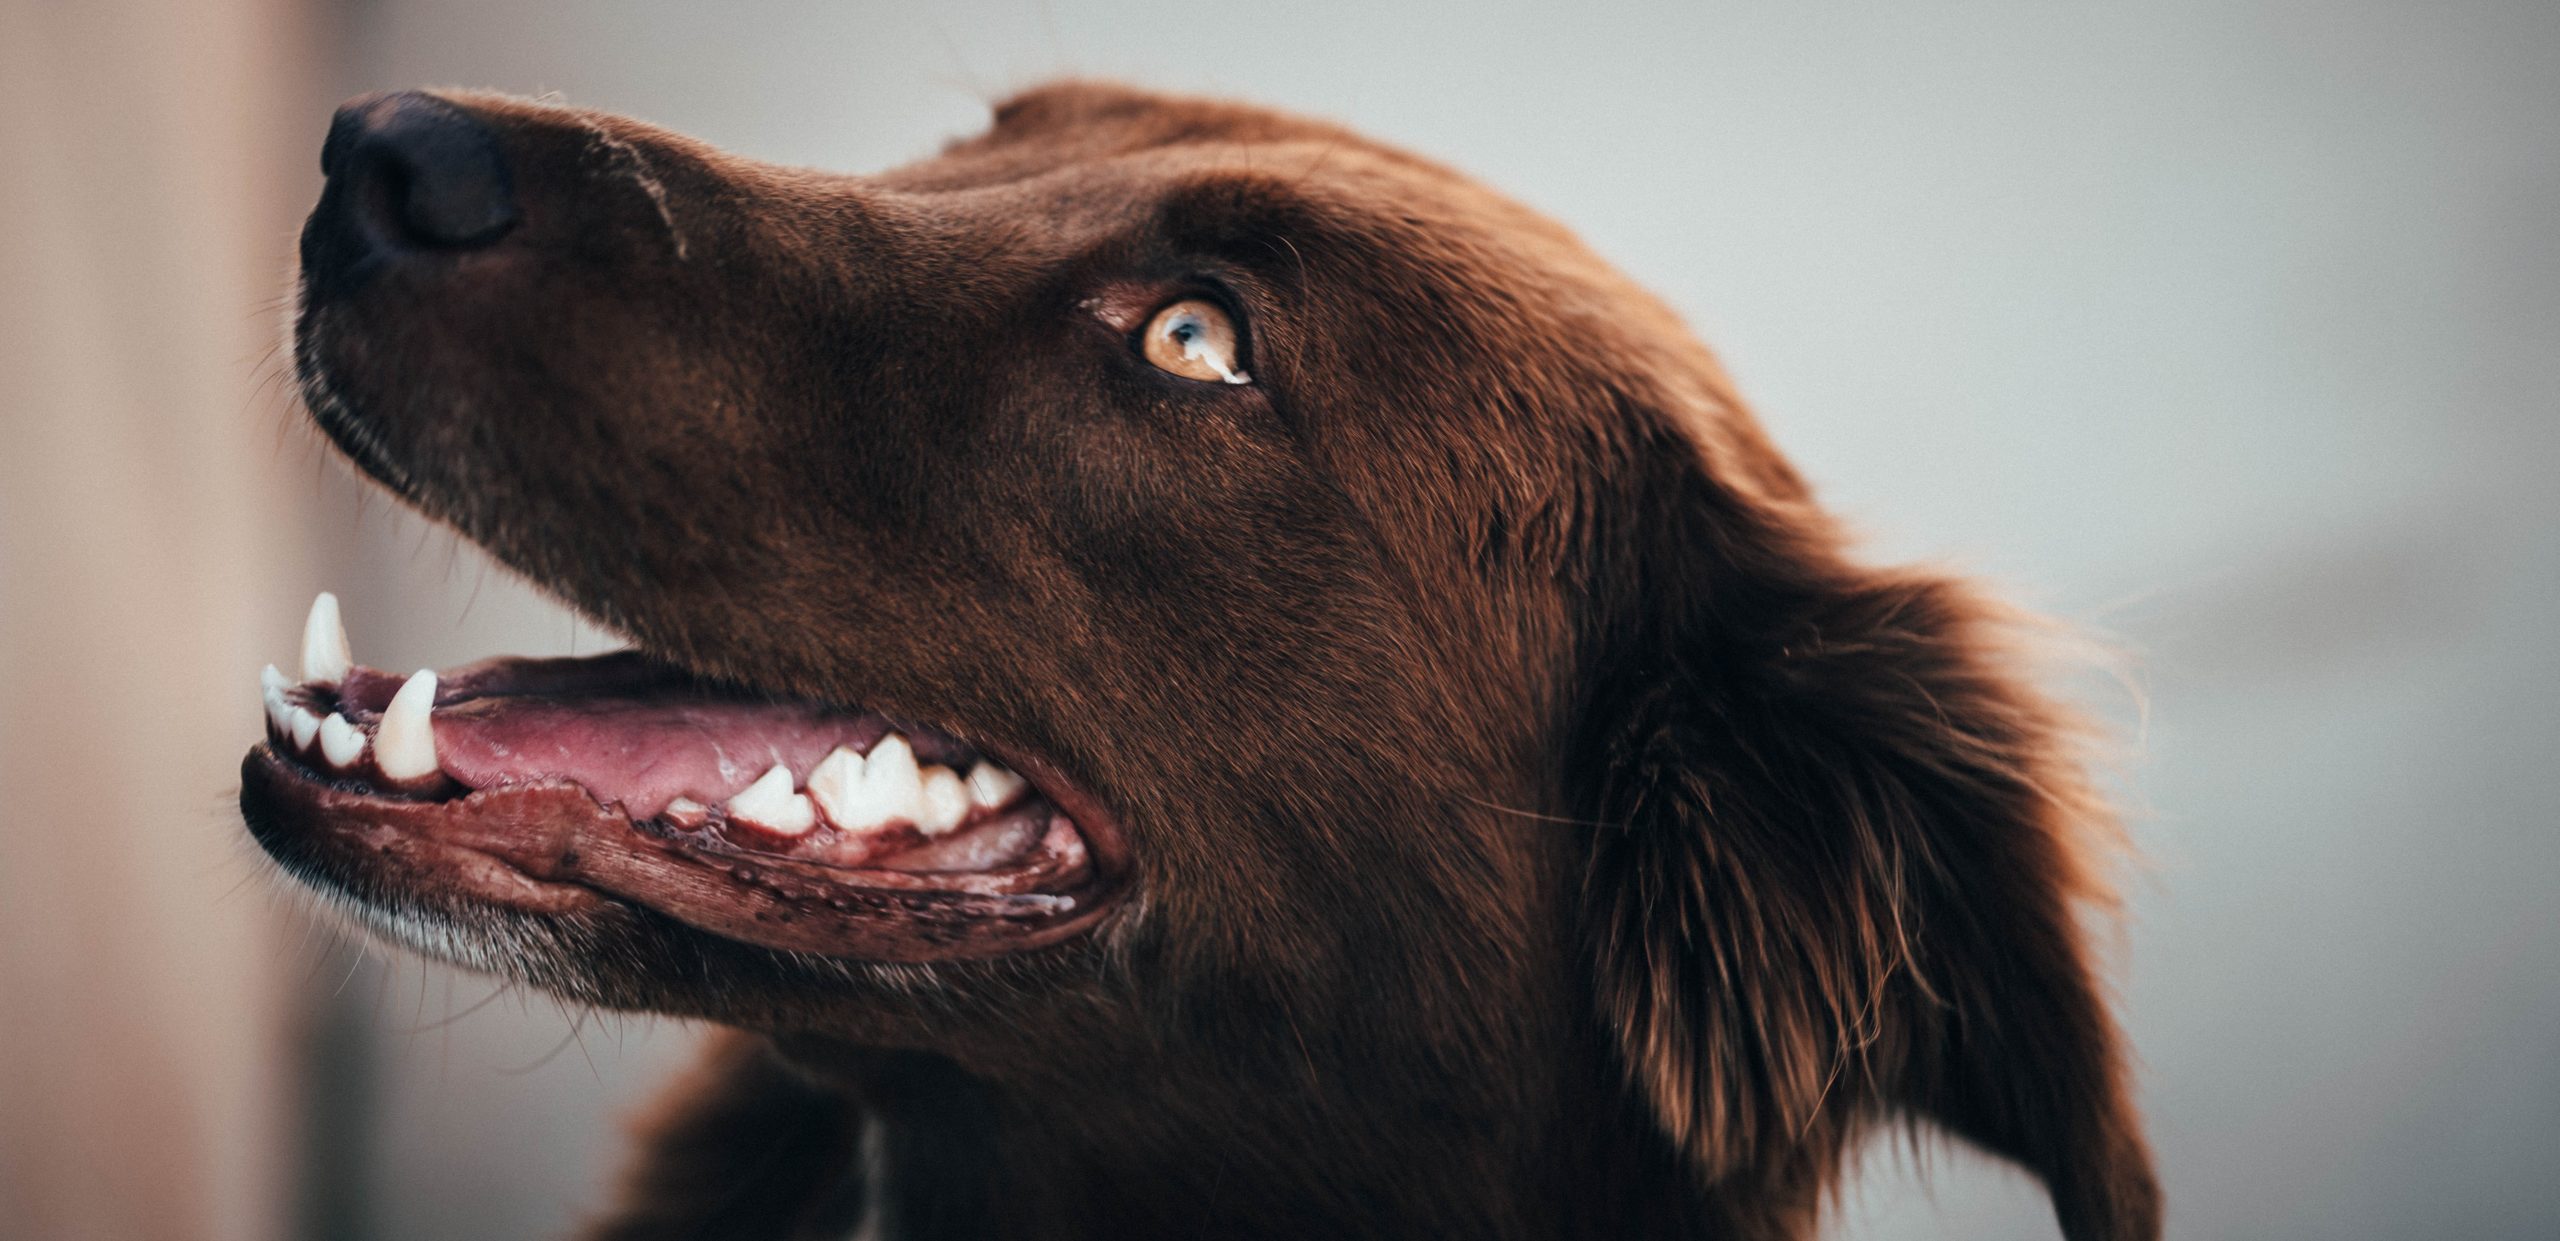 How to clean dog teeth without brushing?